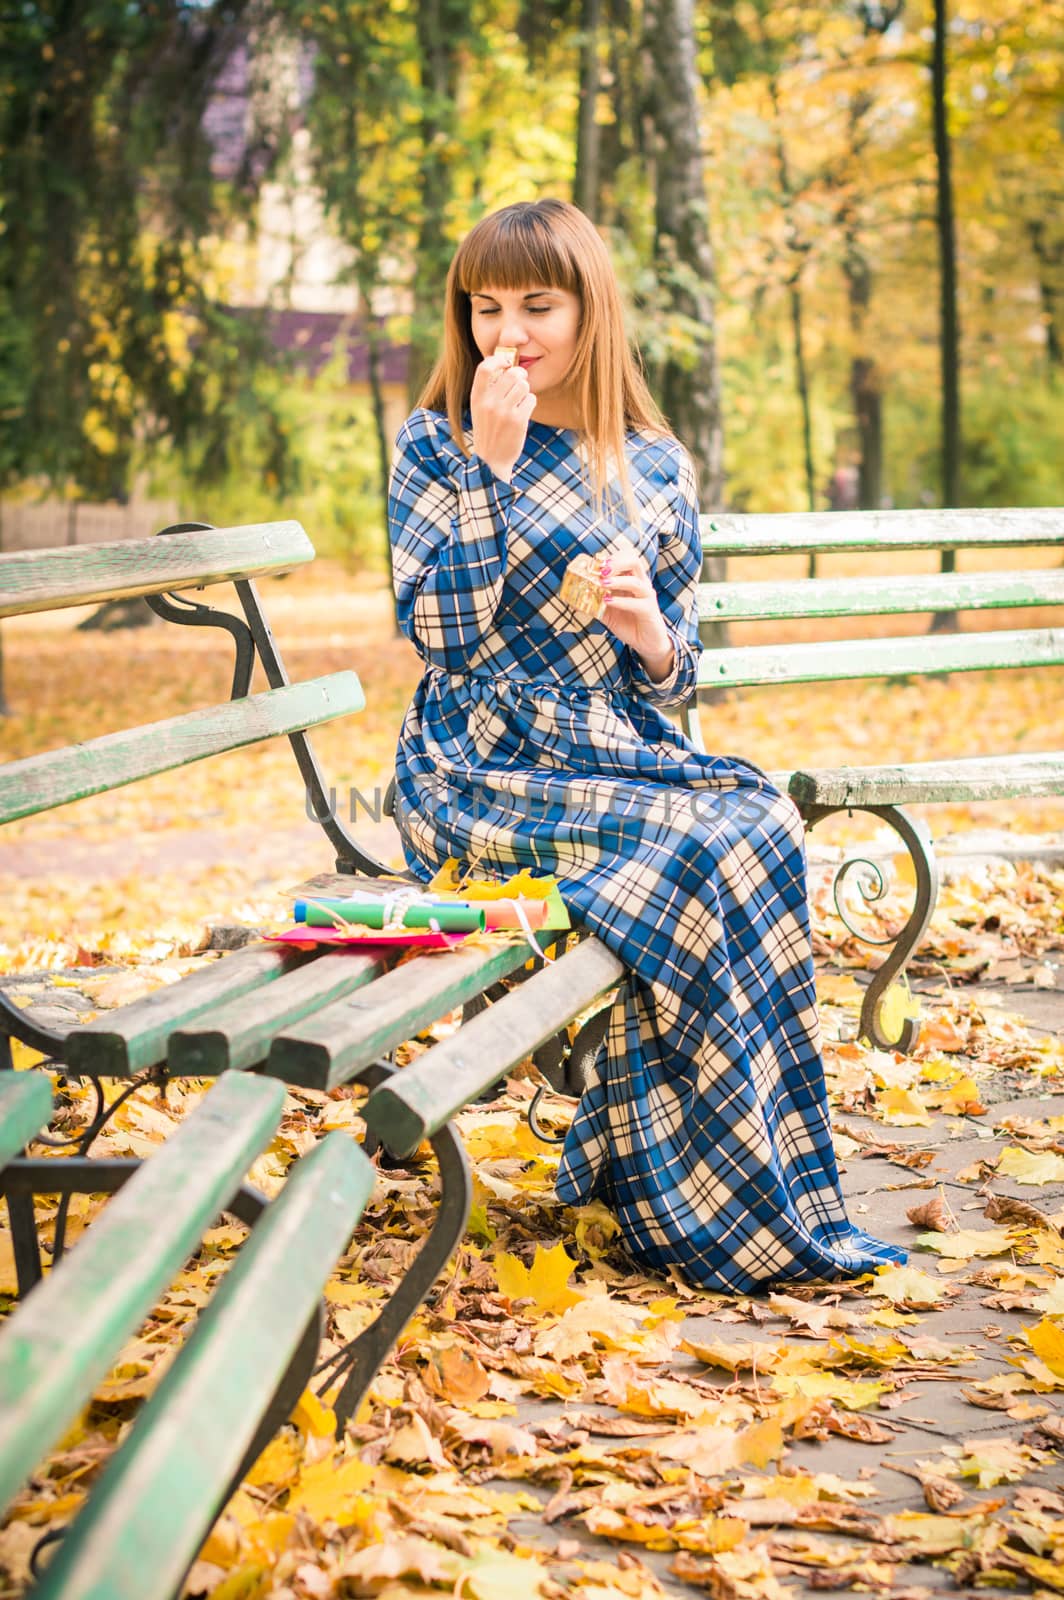 beautiful, dreamy girl with long straight hair in a blue long dress in the park in autumn